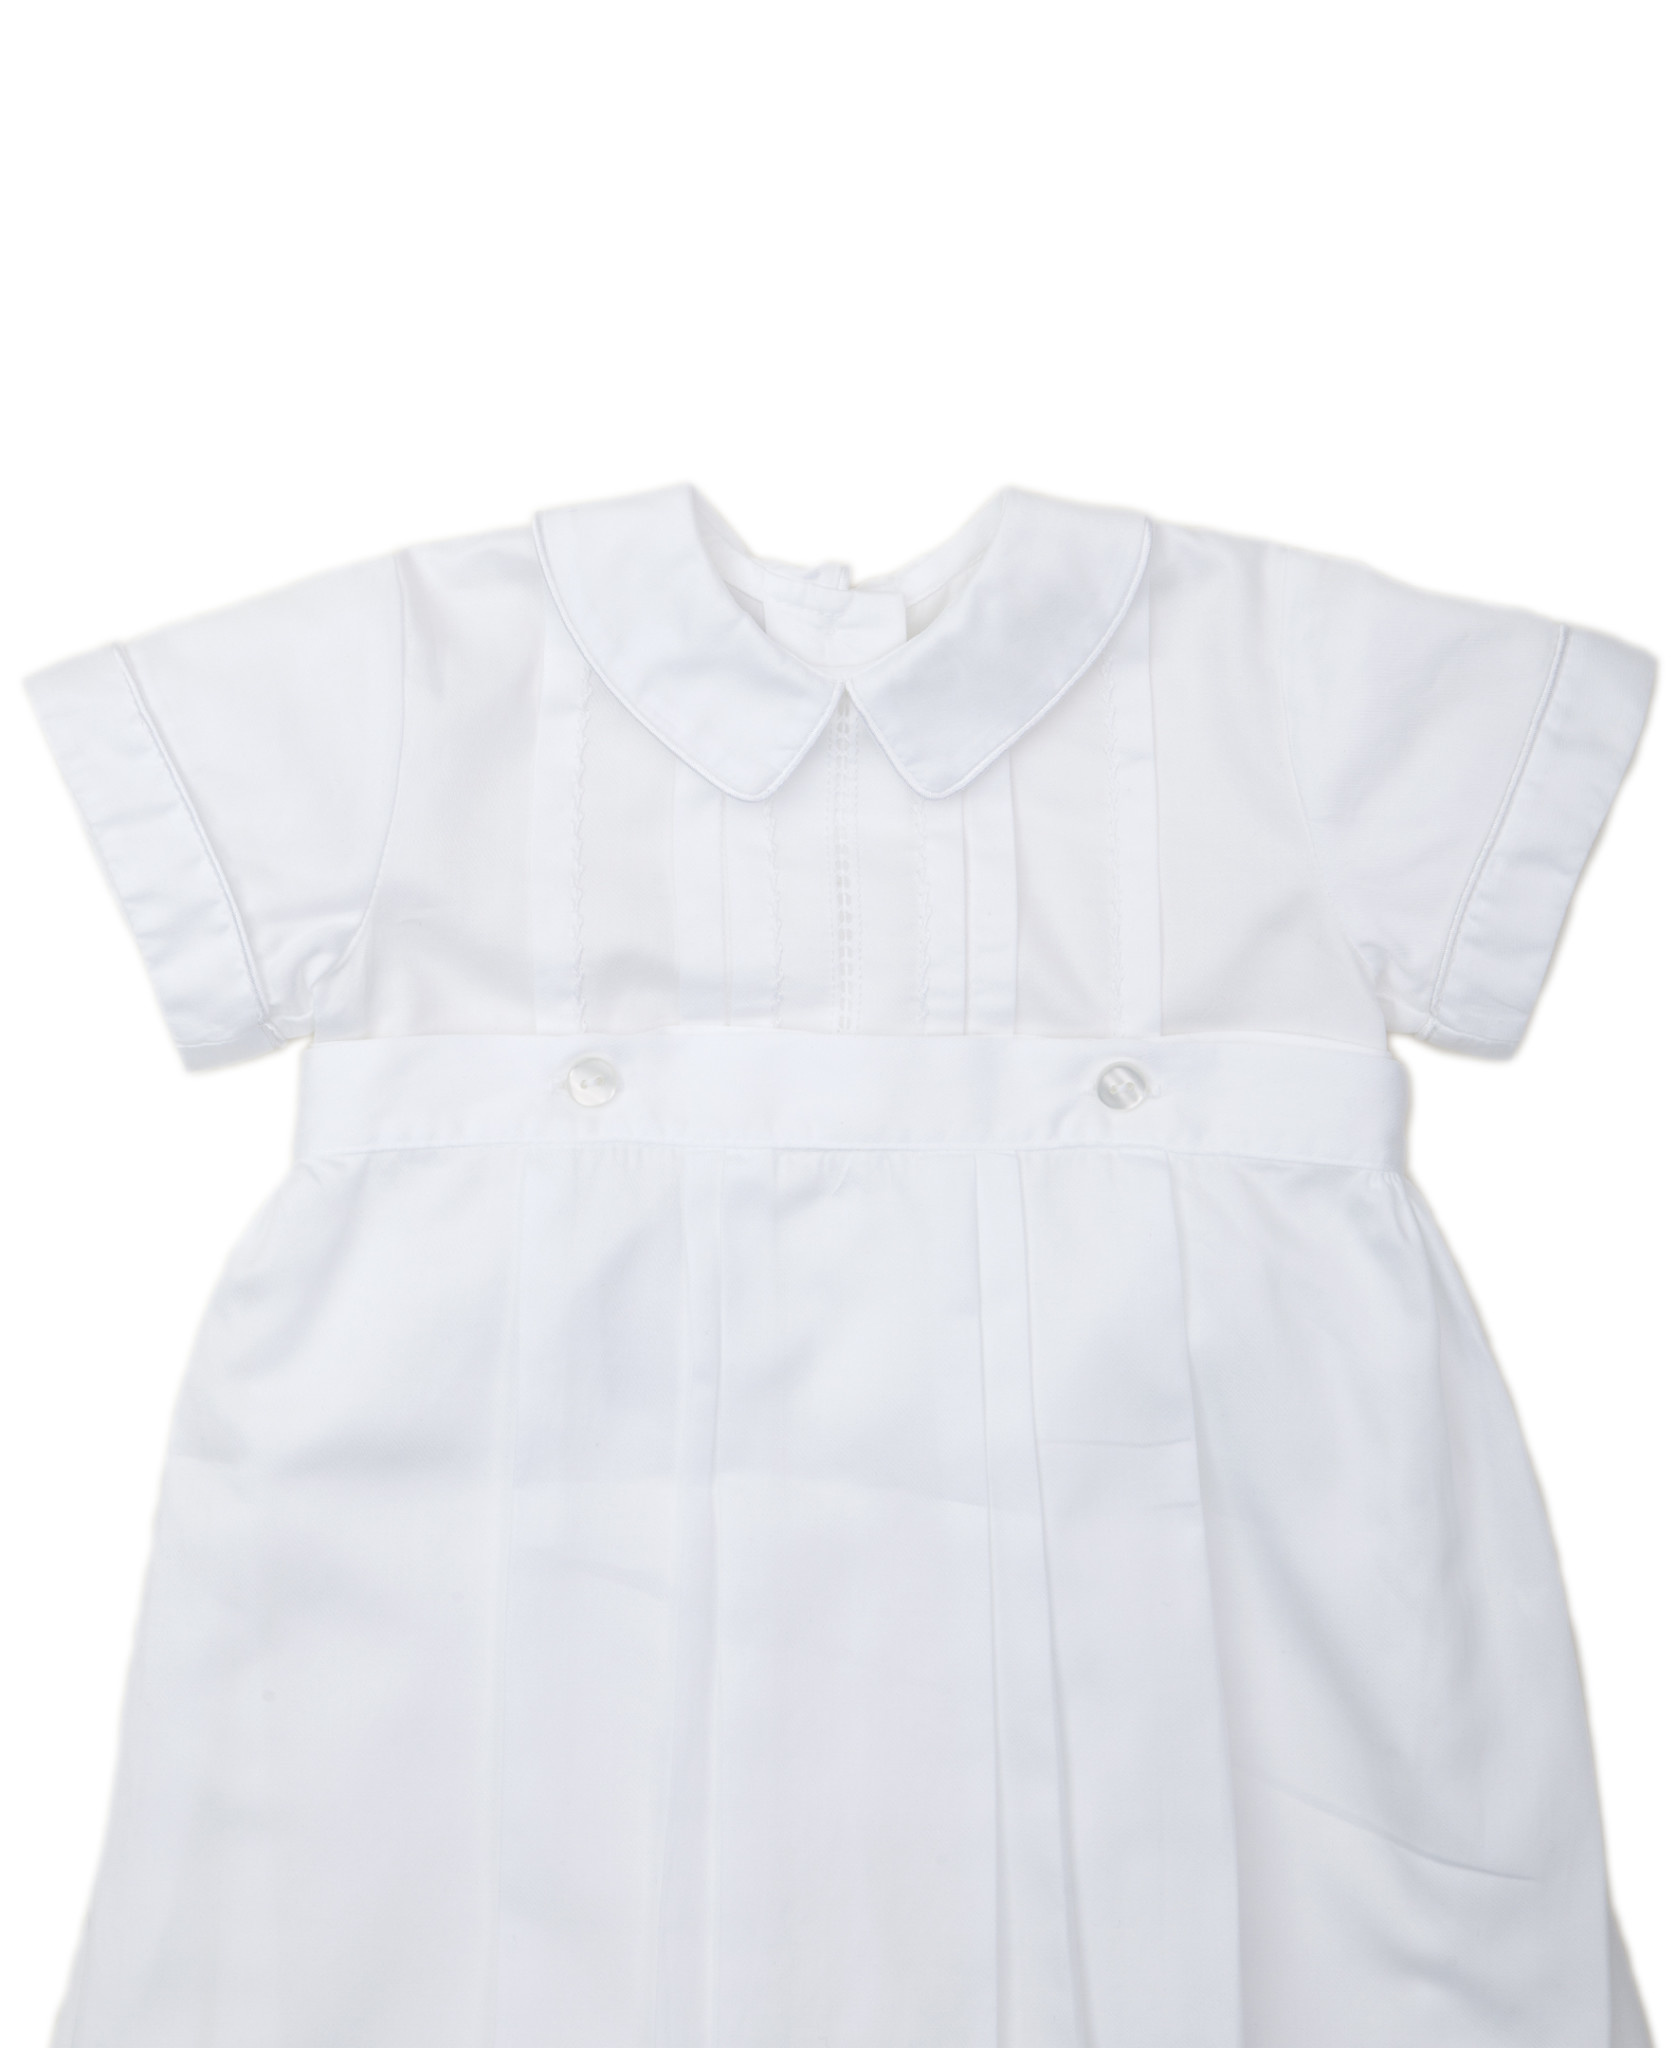 Silene Christening Gown - Delicate Accents for a Special Day